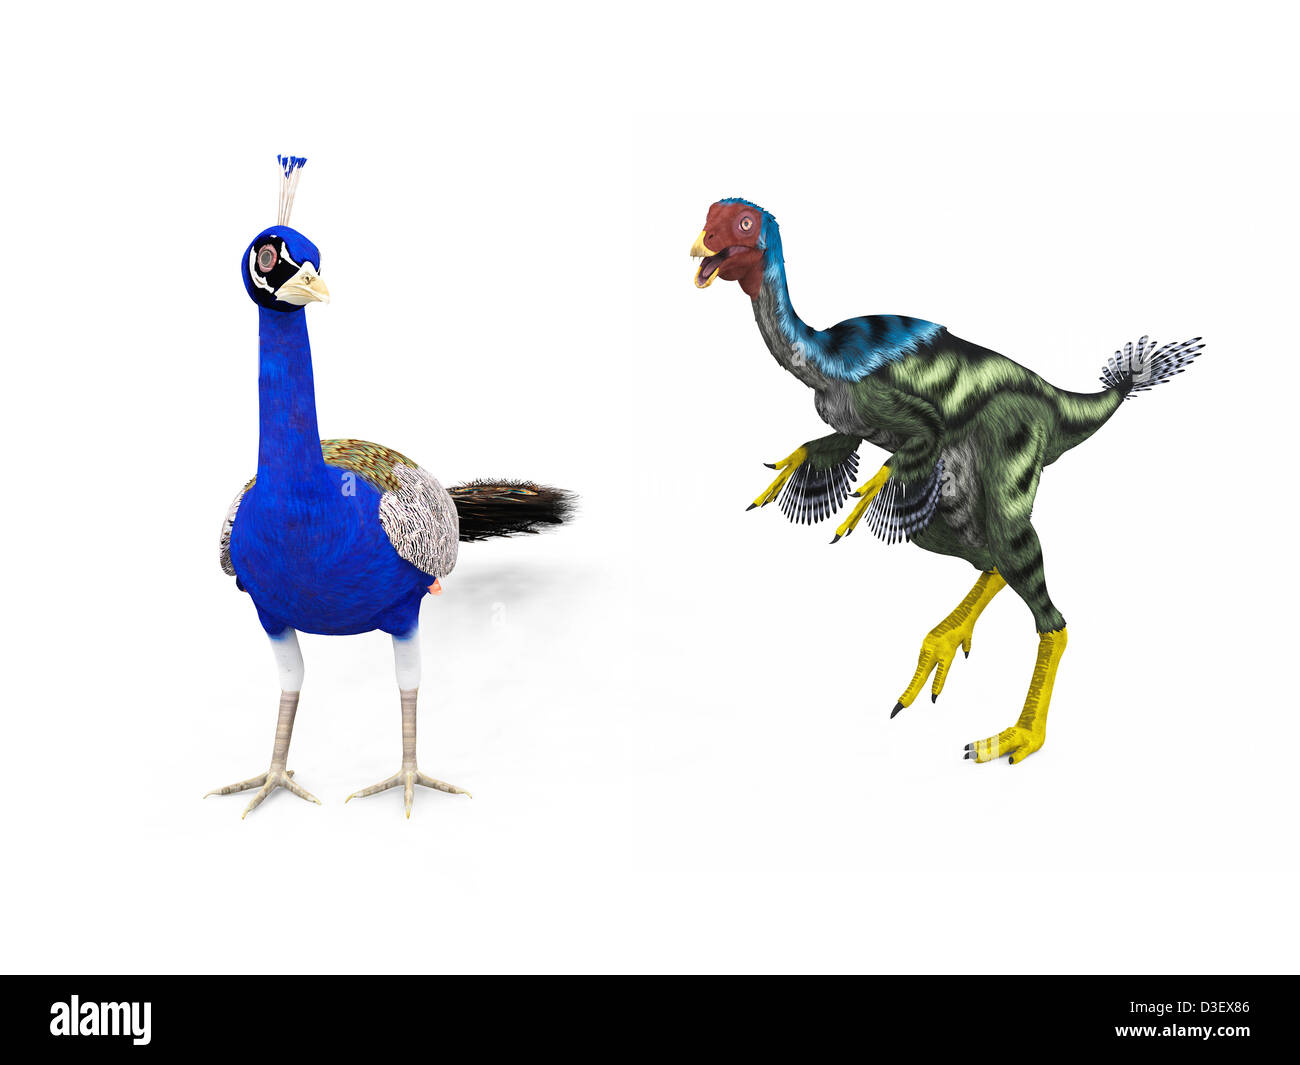 A Caudipteryx compared to a modern adult peacock. Stock Photo